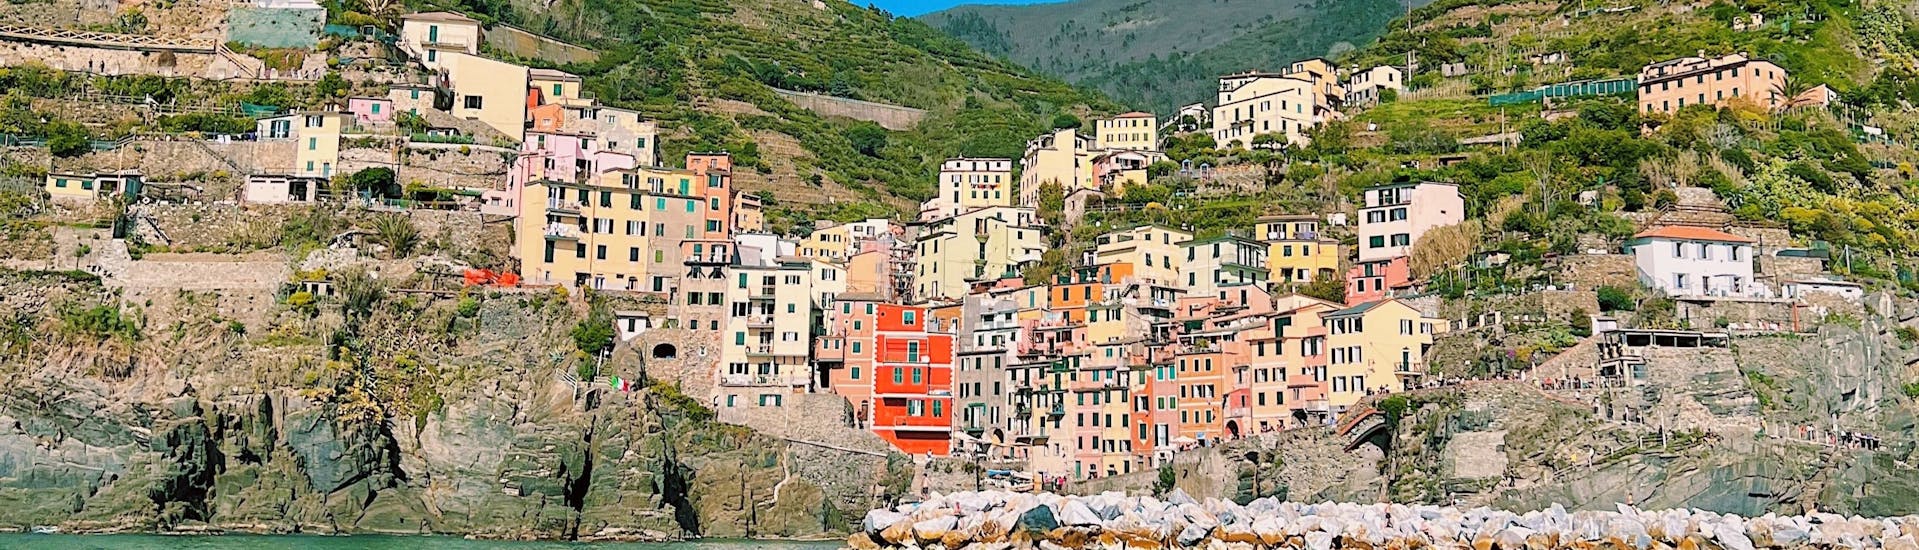 The village of Riomaggiore seen from the sea during the sailing boat trip from La Spezia to Cinque Terre with Lunch with Velagiovane.